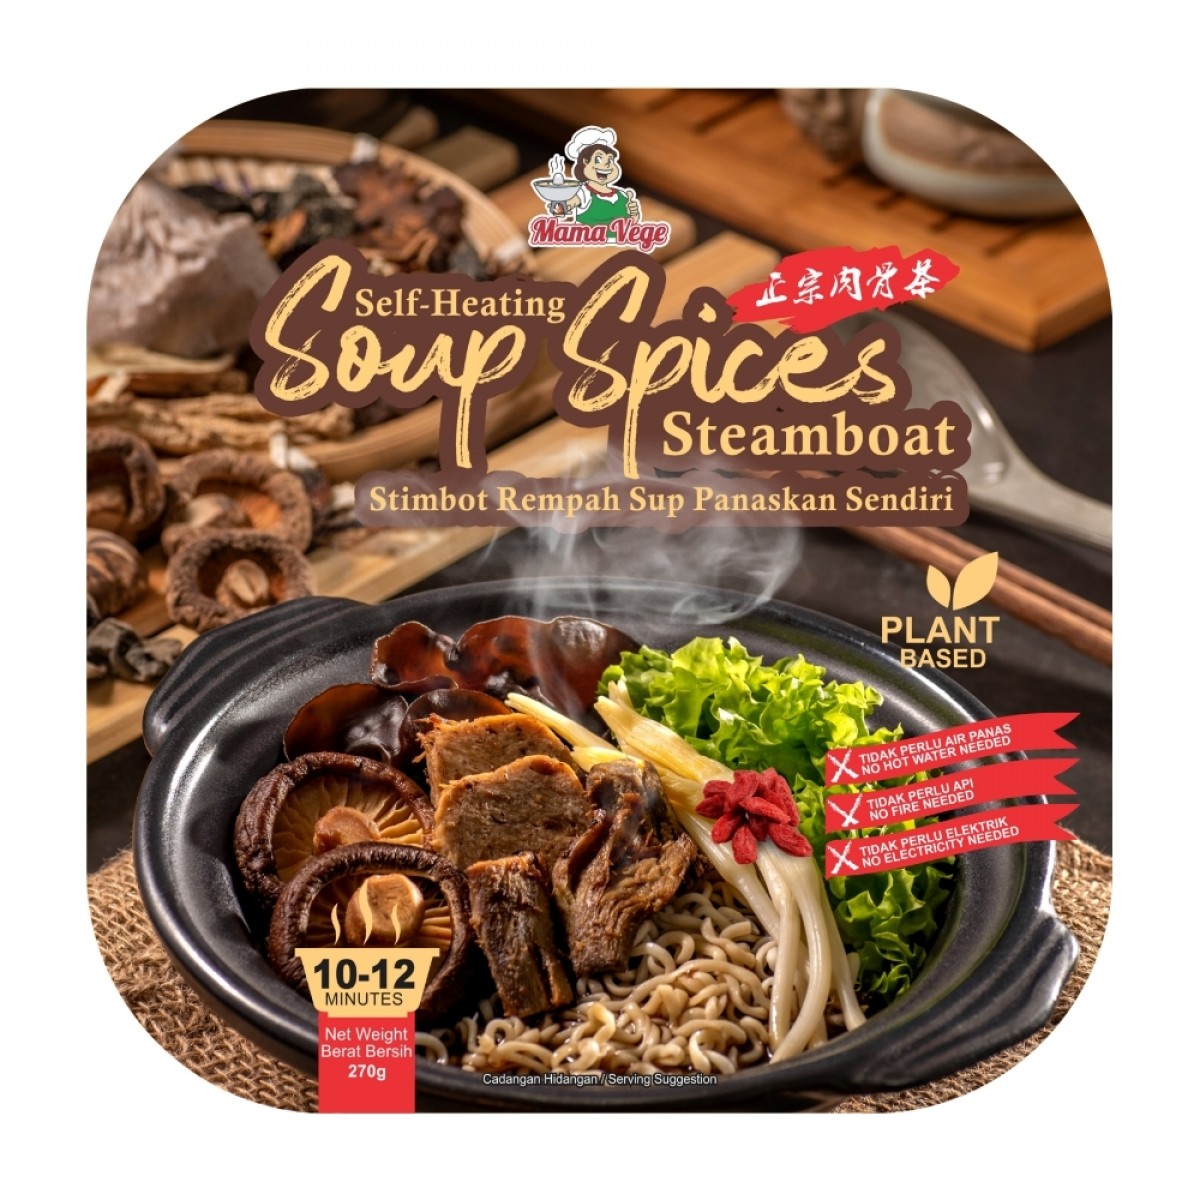 Self-heating Soup Spices Steamboat (270g)